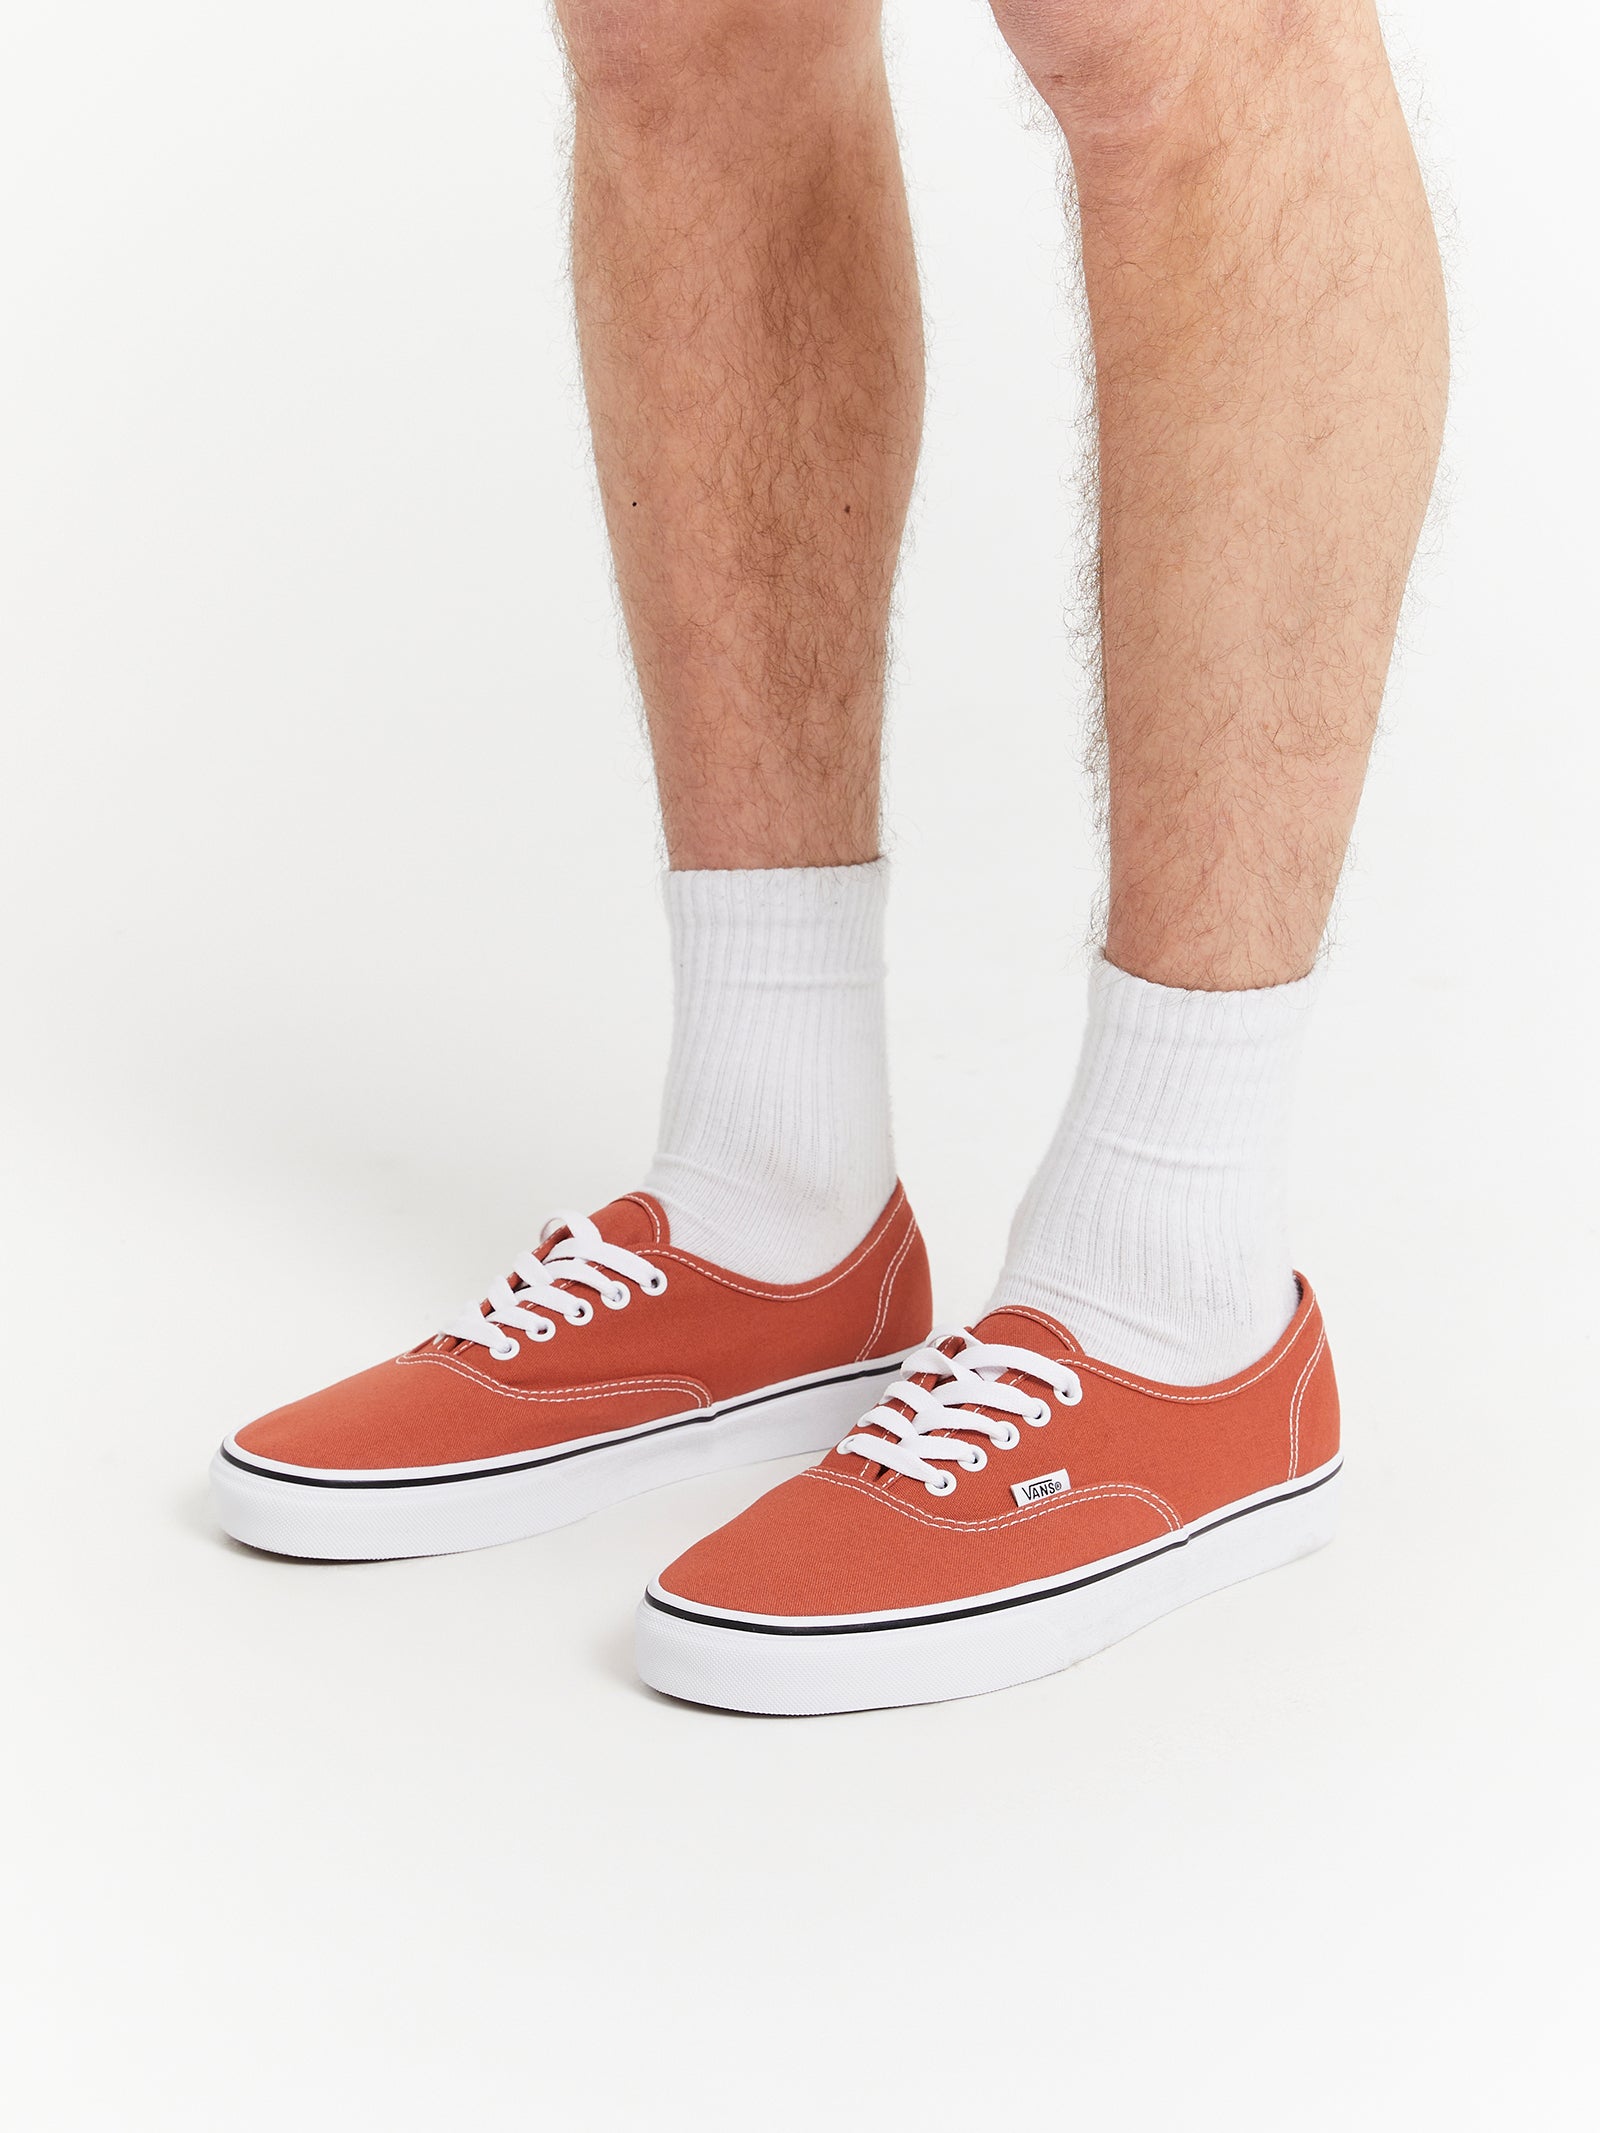 Unisex Authentic Color Theory Sneakers in Coral